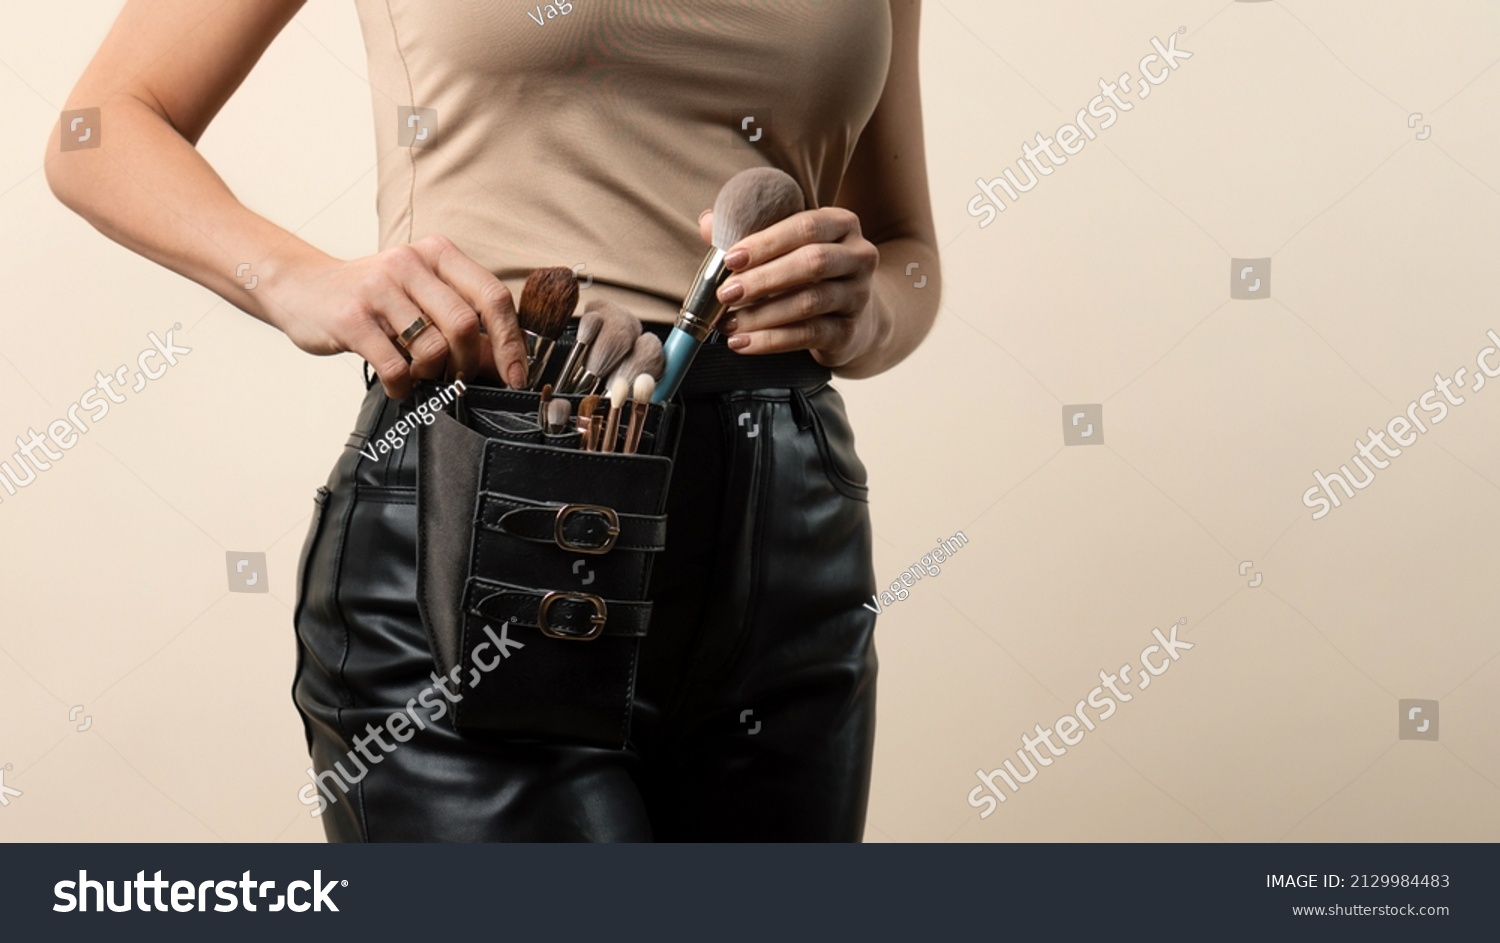 Thigh bag with different brushes on faceless professional makeup artist. Unrecognizable make-up artist with belt bag with tassels or makeup brushes over beige background #2129984483